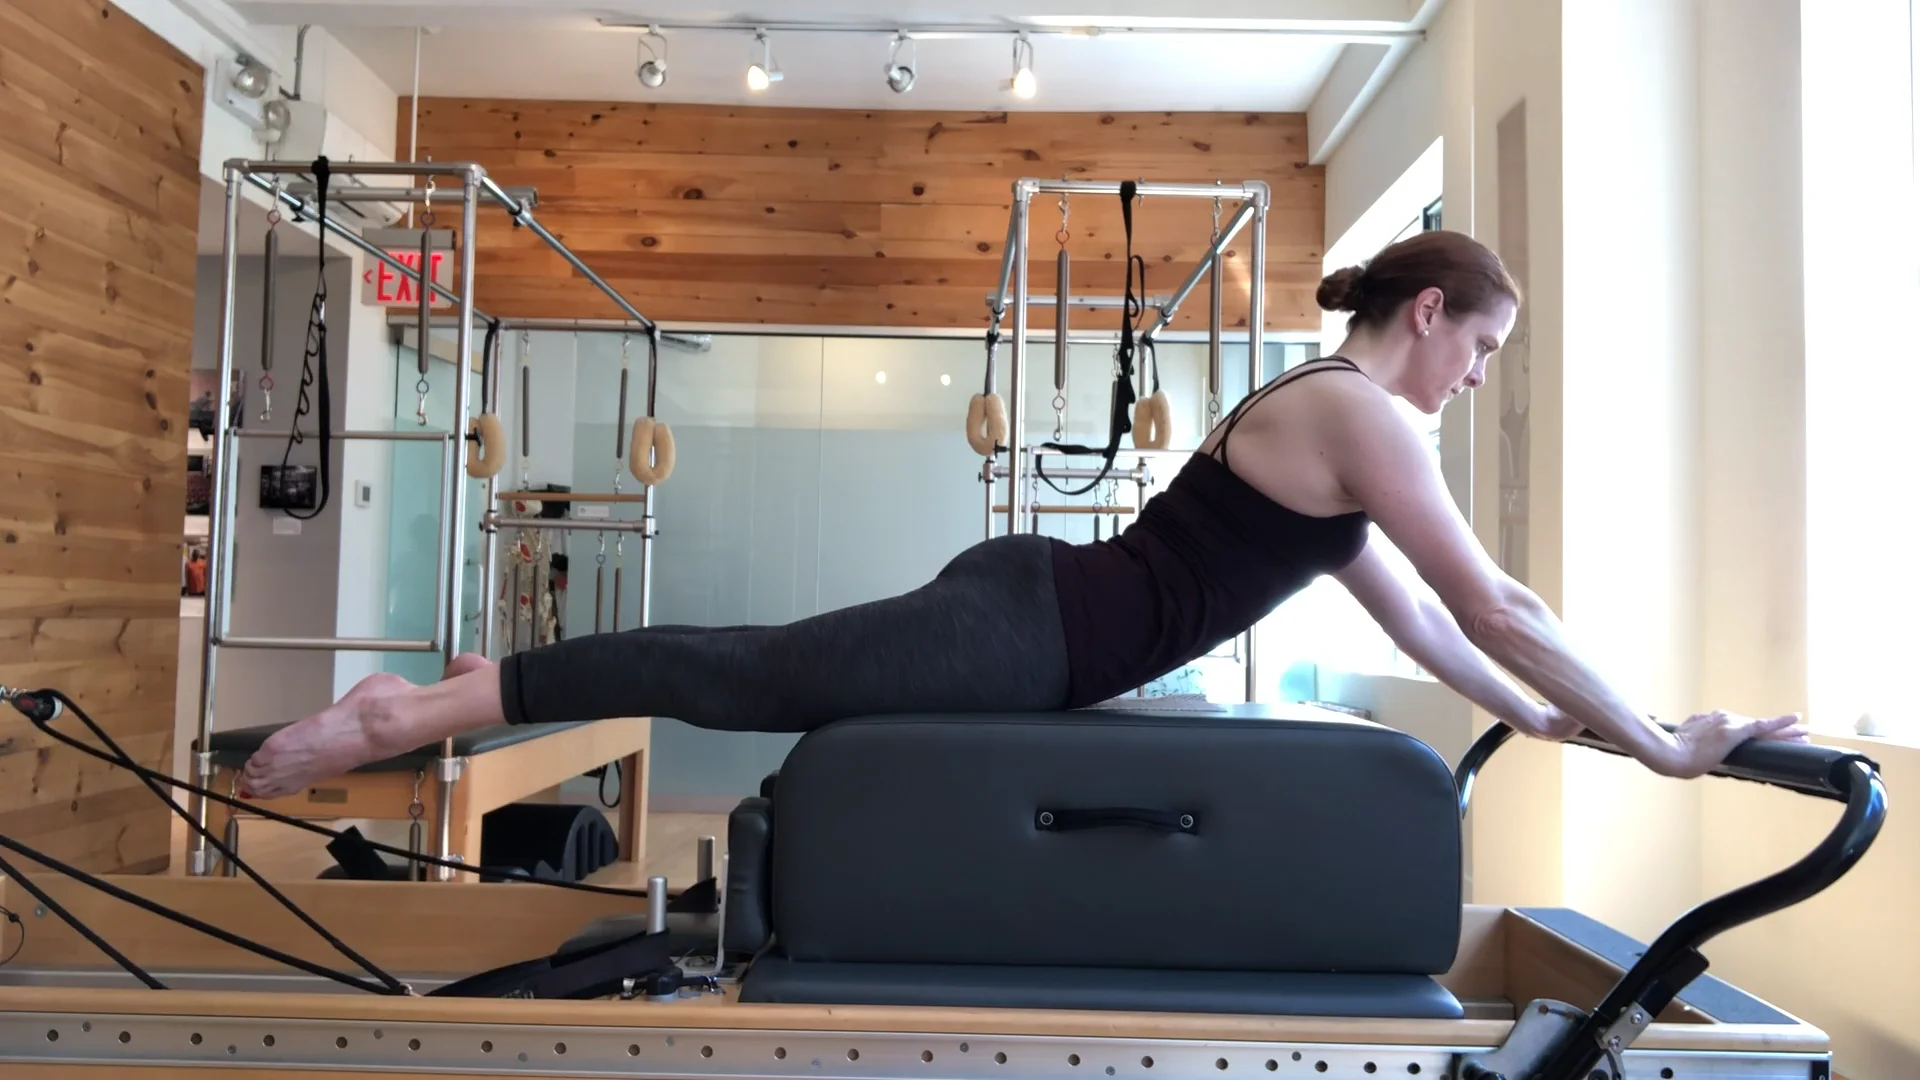 Teaser on the long box is an advanced reformer exercise that is extremely  challenging with all the moving parts. I have used the box and Cadillac  springs